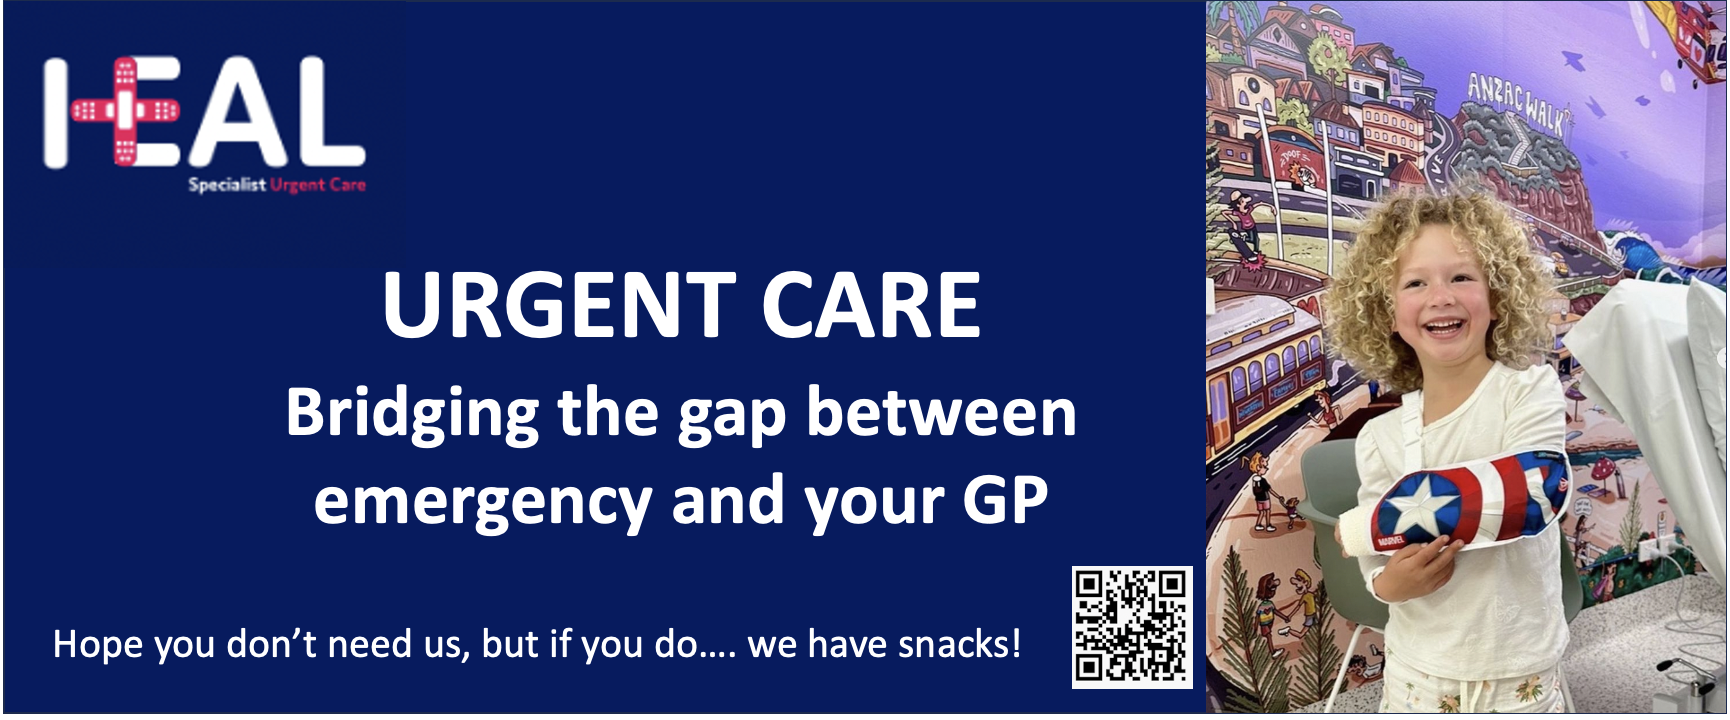 Heal Urgent care, the gap between the emergency department and your GP